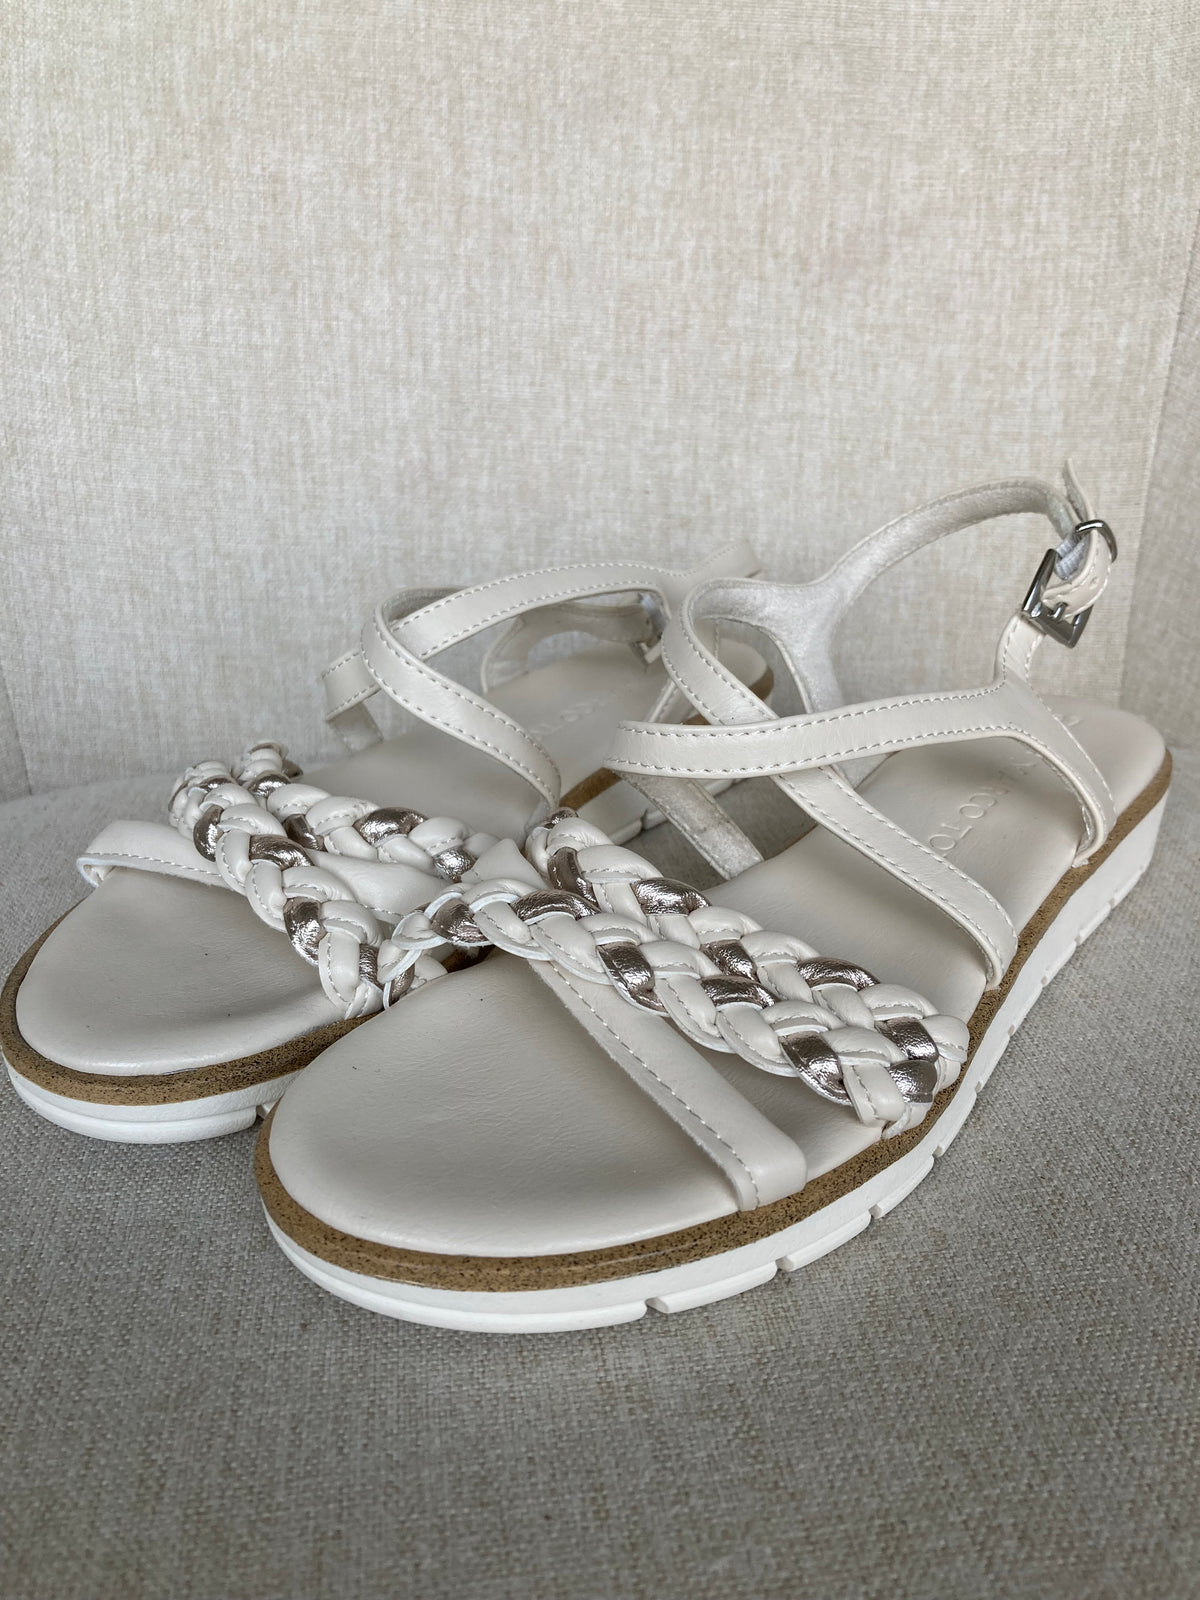 Cream leather sandals by Marco TOZZI - Size 4